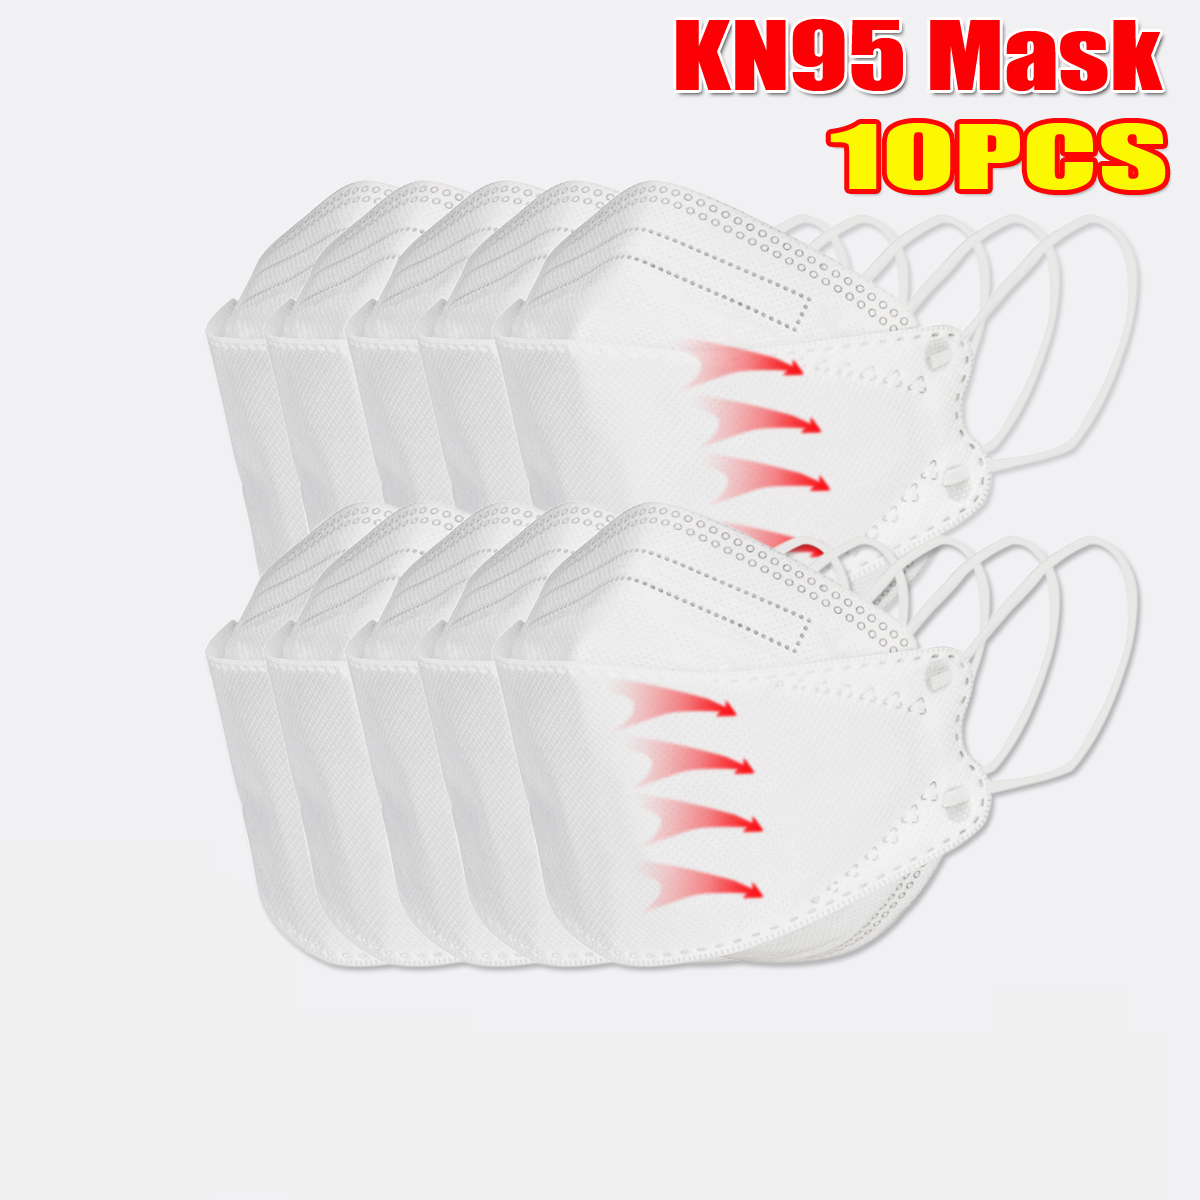 <US Instock> 10 Pcs / Pack of KN95 MasksCE Certification Passed The GB-2626-KN95 Test PM2.5 Filter Mask